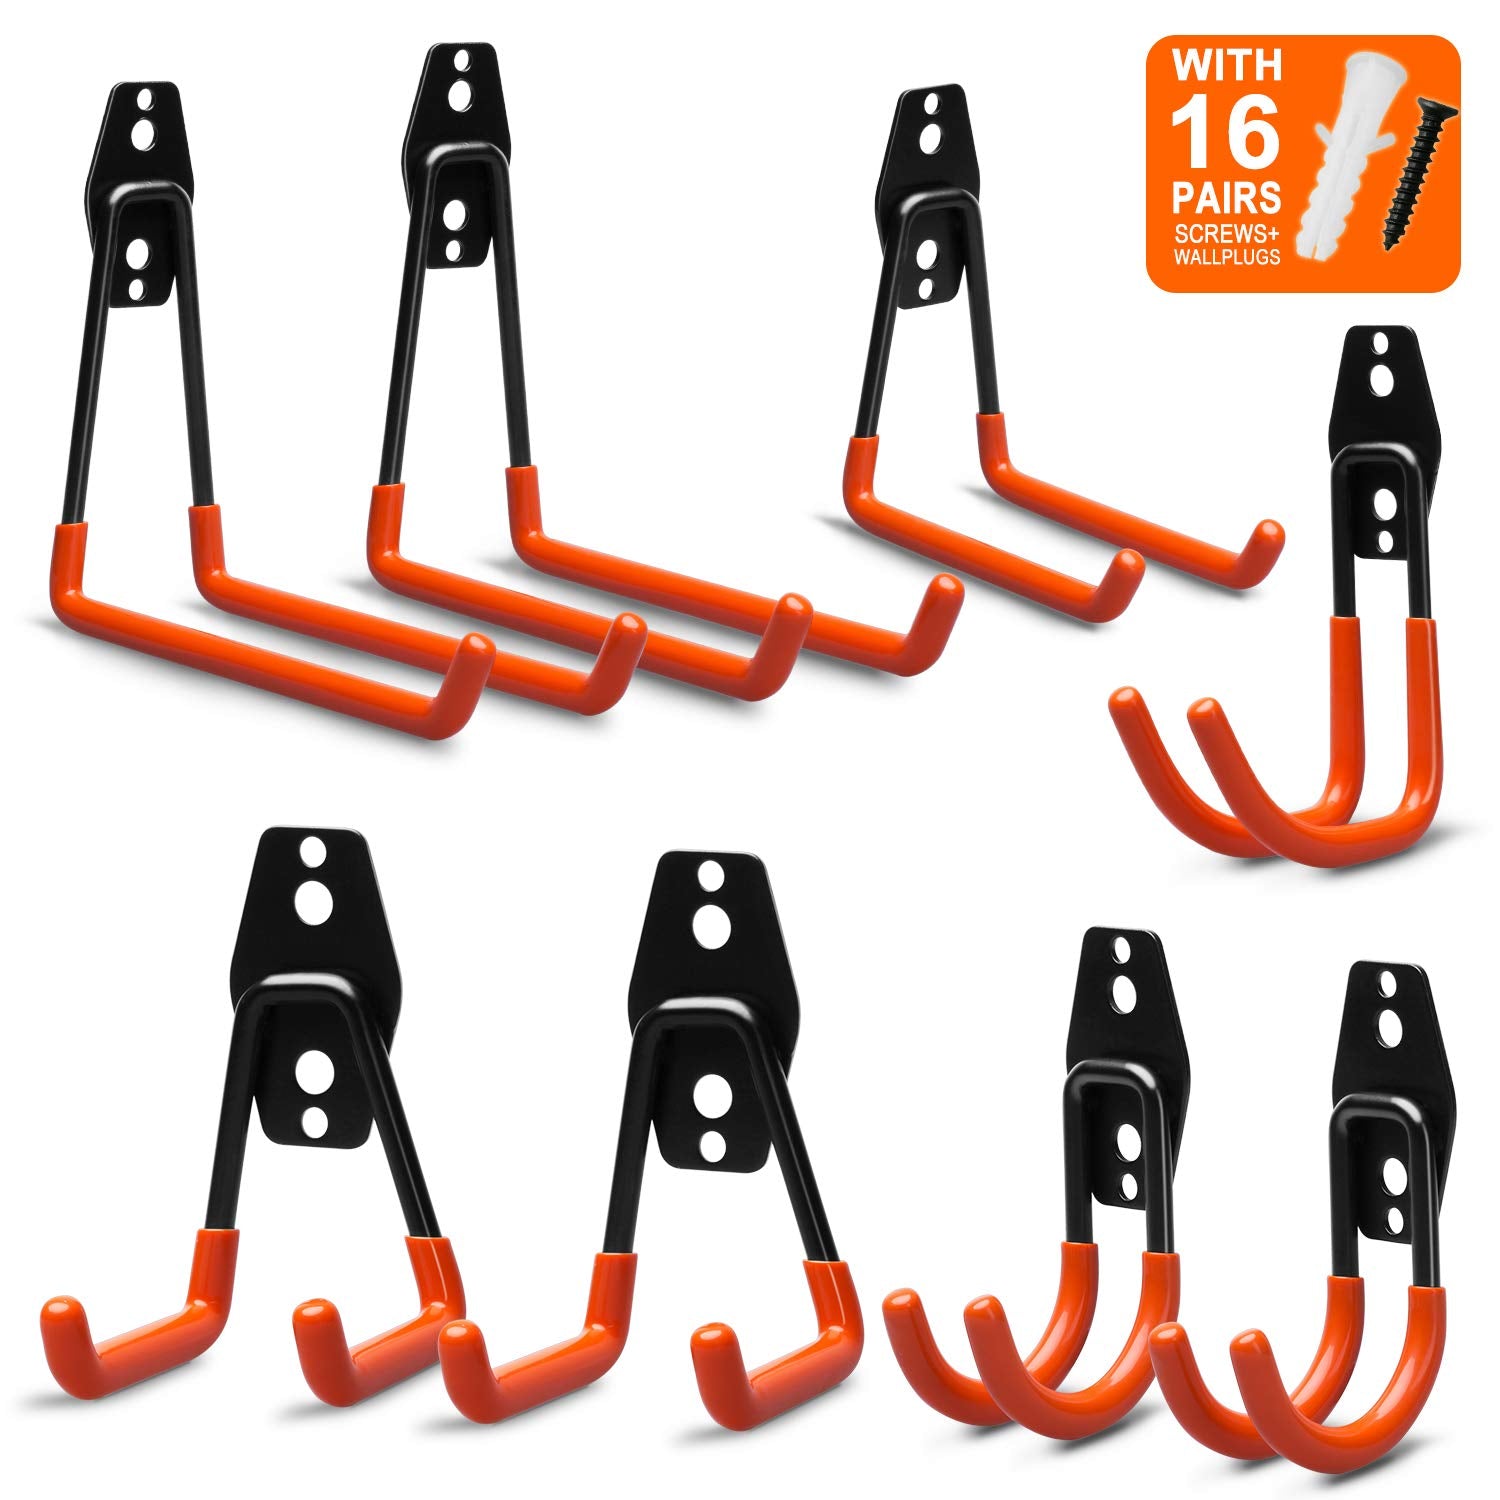 EletecPro 8 Pack Garage Wall Hooks,Steel Multi-Size Extended U-Hook for Heavy Duty Garage Storage Organizers,Bicycle Hanger Utility Hooks with Screws and Wall Anchors (8 PCS Multi-Size Set)